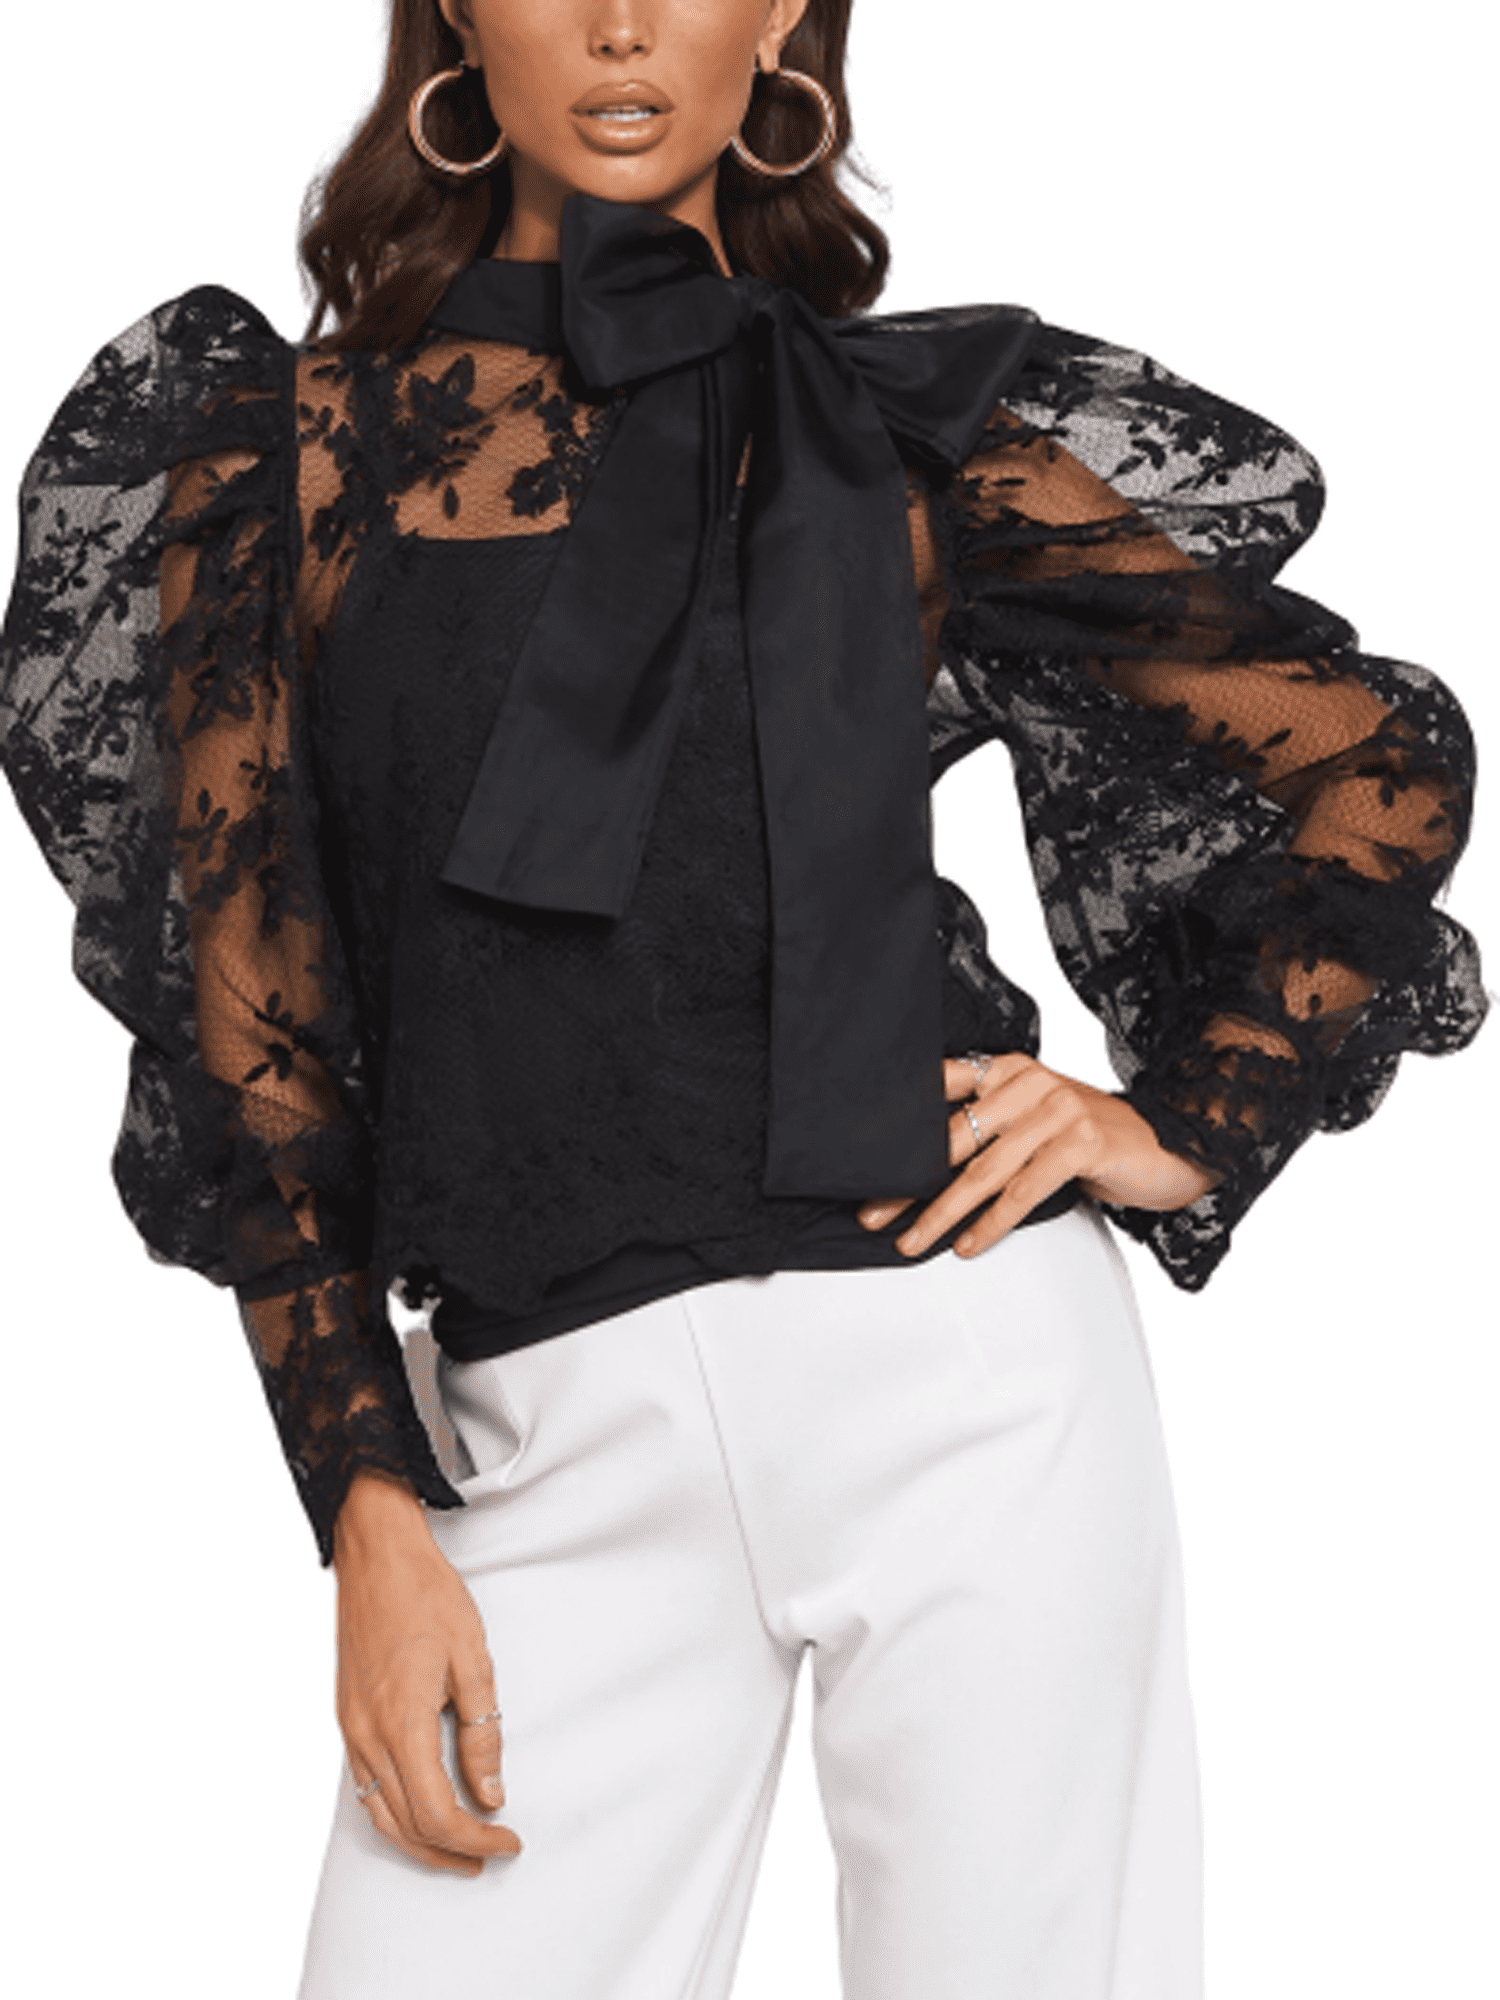 Eyicmarn - Women Bow Tie Neck Lace Floral Mesh Sheer See-through Top